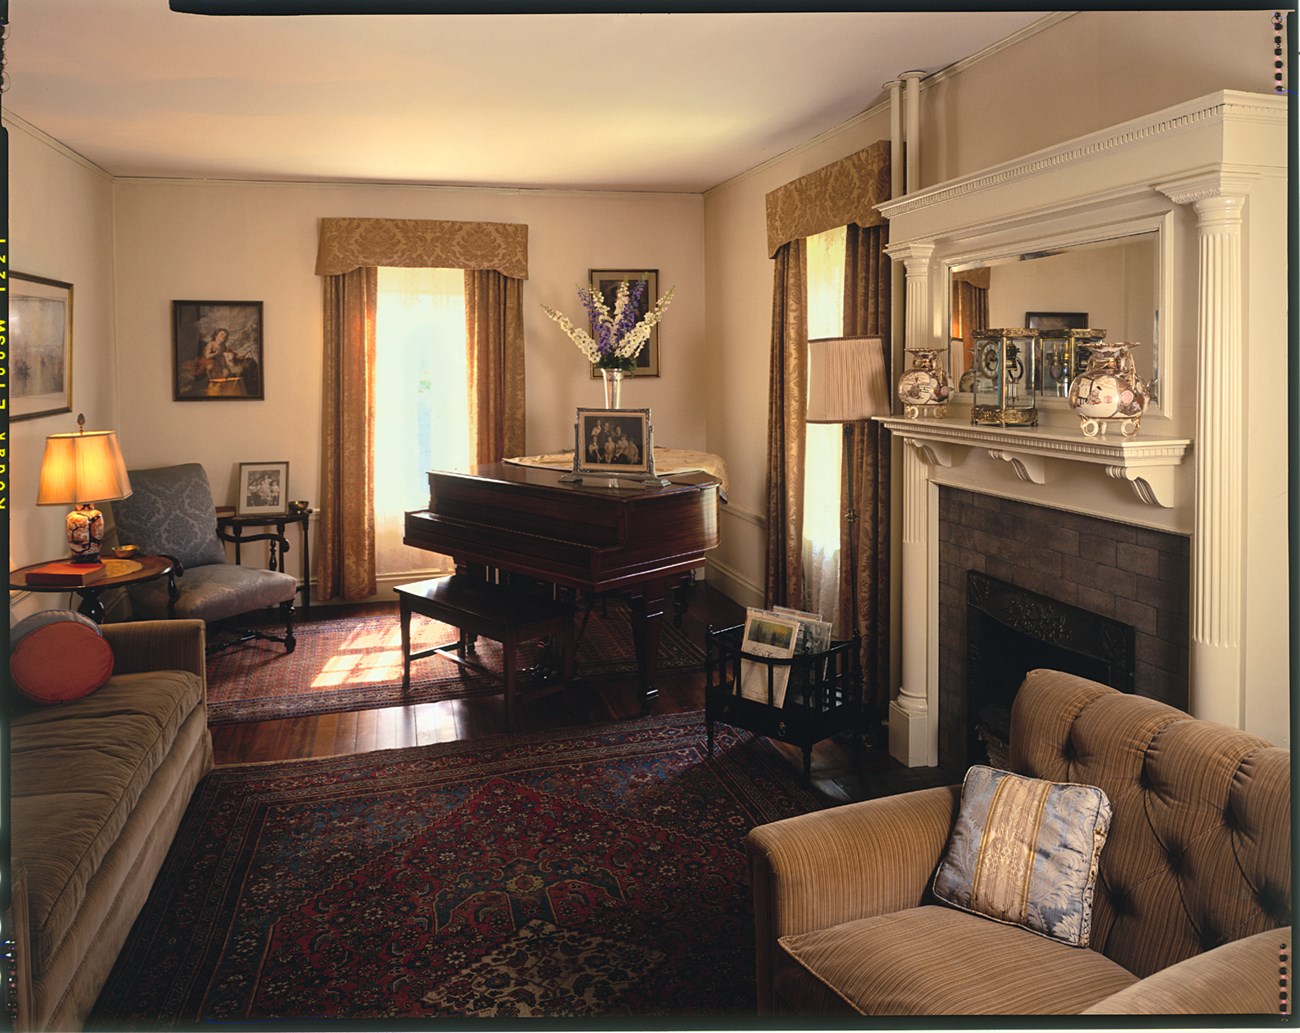 A photo of a sunlit room with a piano, fireplace, couch, armchairs, and lamps. Rugs cover the floor, paintings hang on the walls. Japanese vases and a clock sit on the fireplace mantle. By the piano are books in a bin, family photos, and a flower vase.